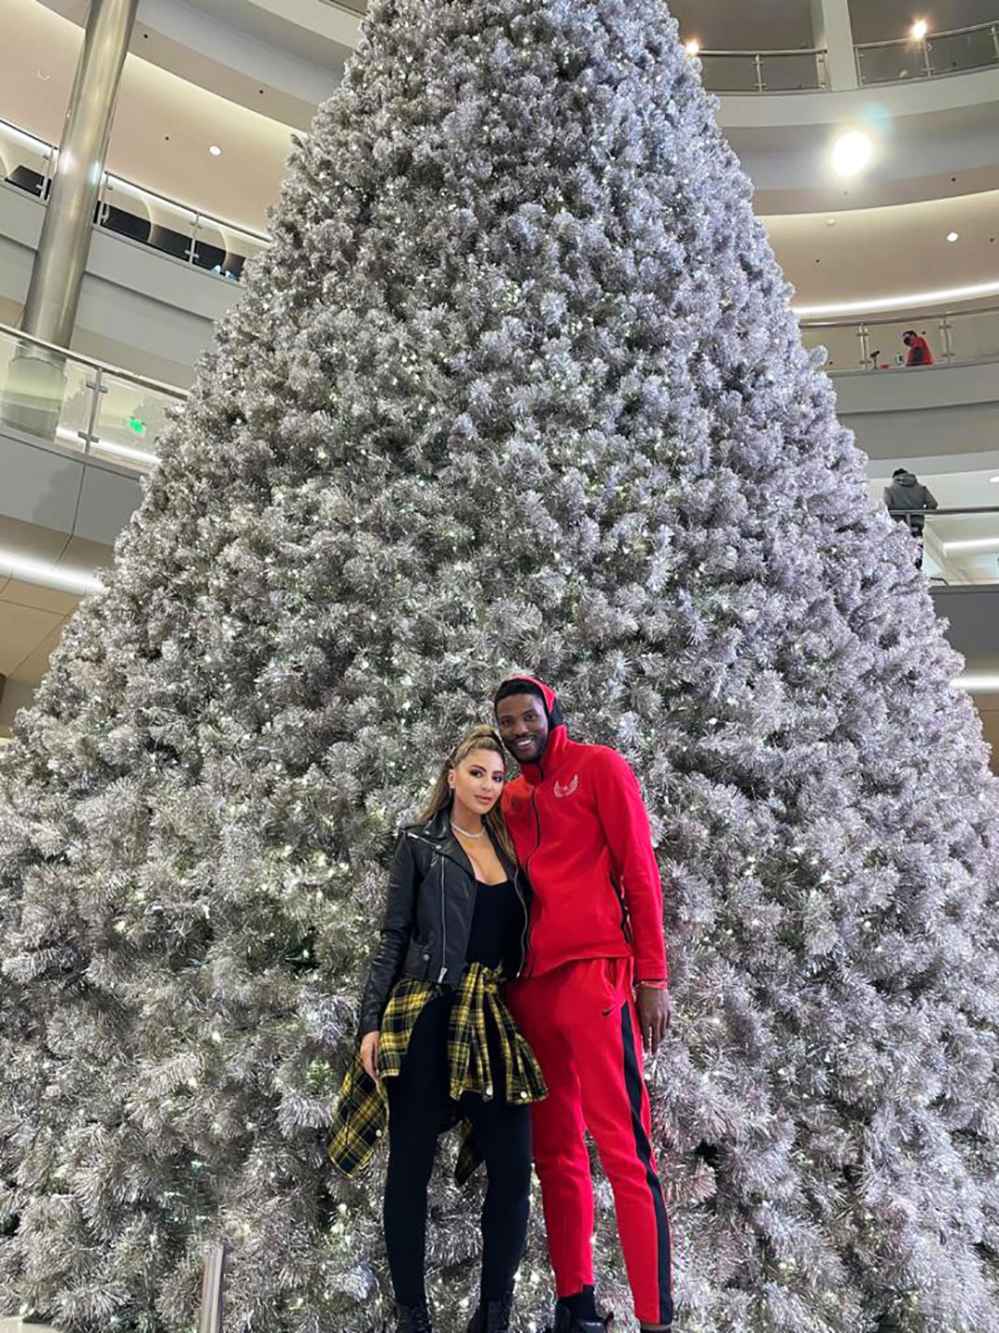 Larsa Pippen and Malik Beasley Pose in Front of Christmas Tree Amid Ongoing Romance Drama